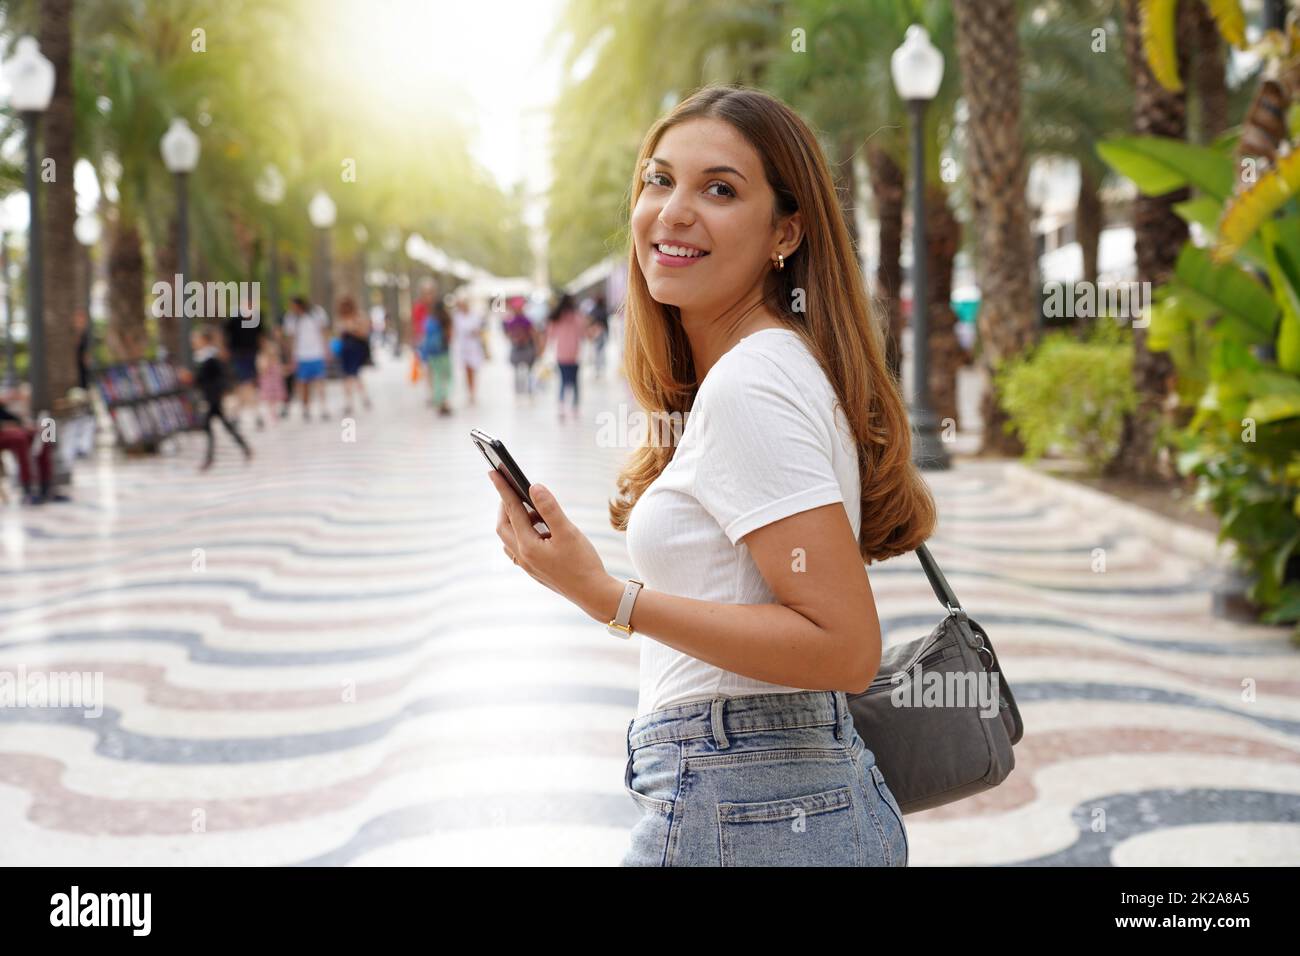 Spring girl walking turn around holding smartphone in the city Stock Photo